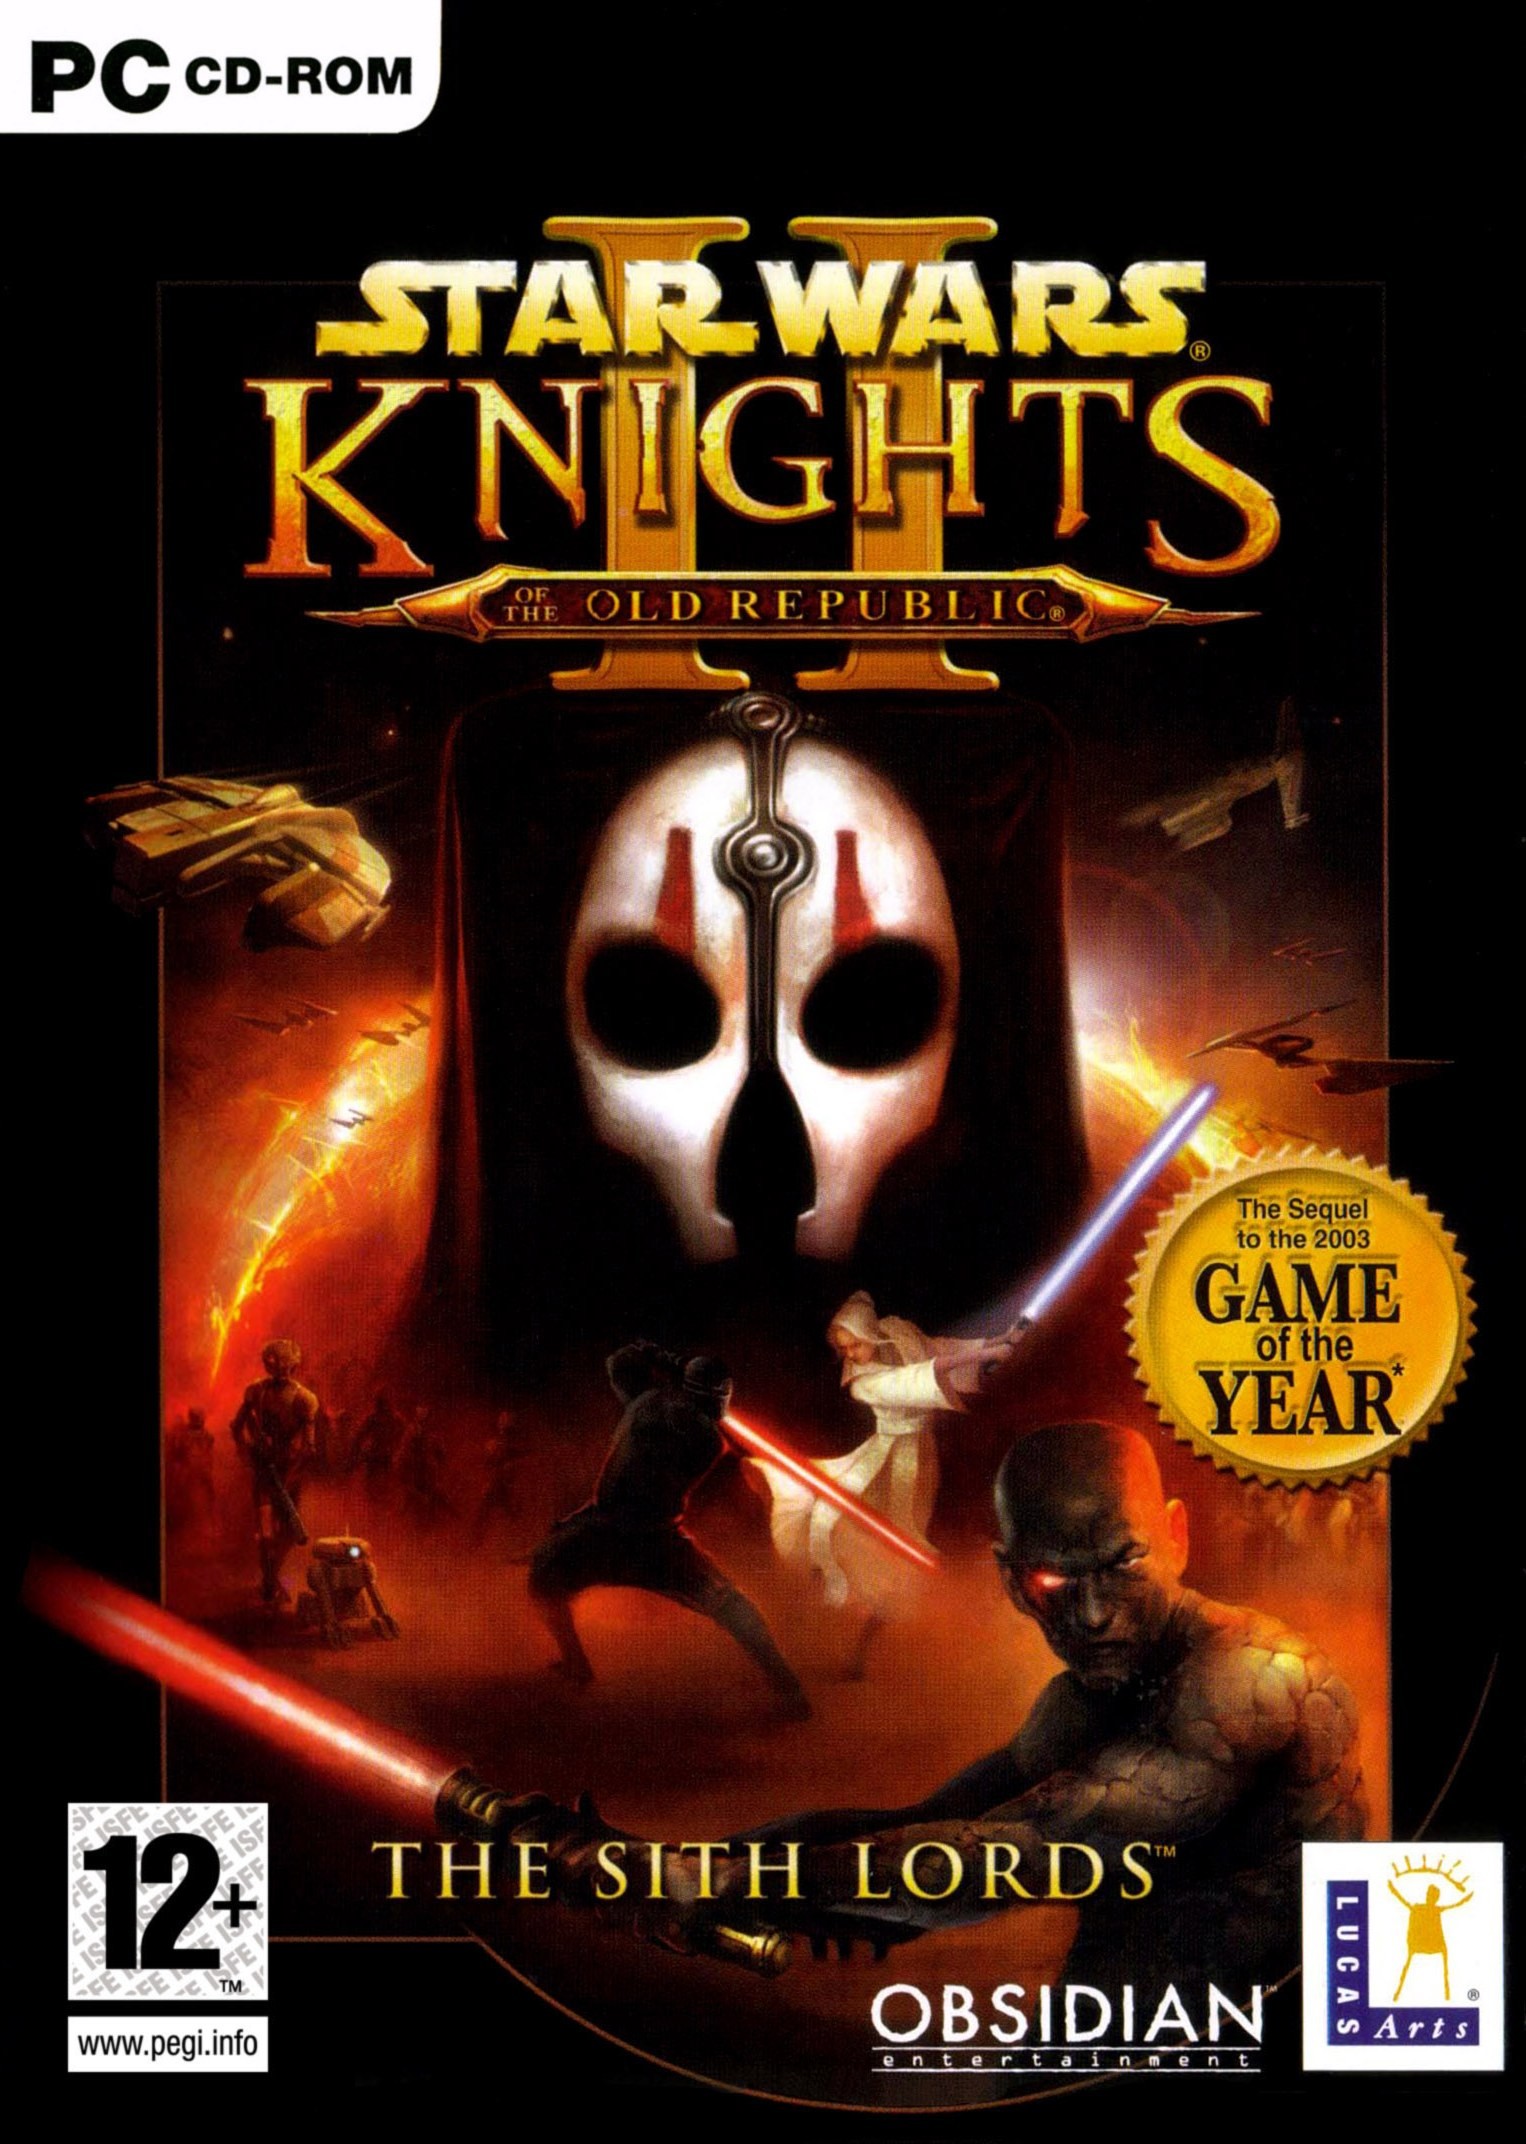 1526x2144 Star Wars: Knights of the Old Republic II The Sith Lords